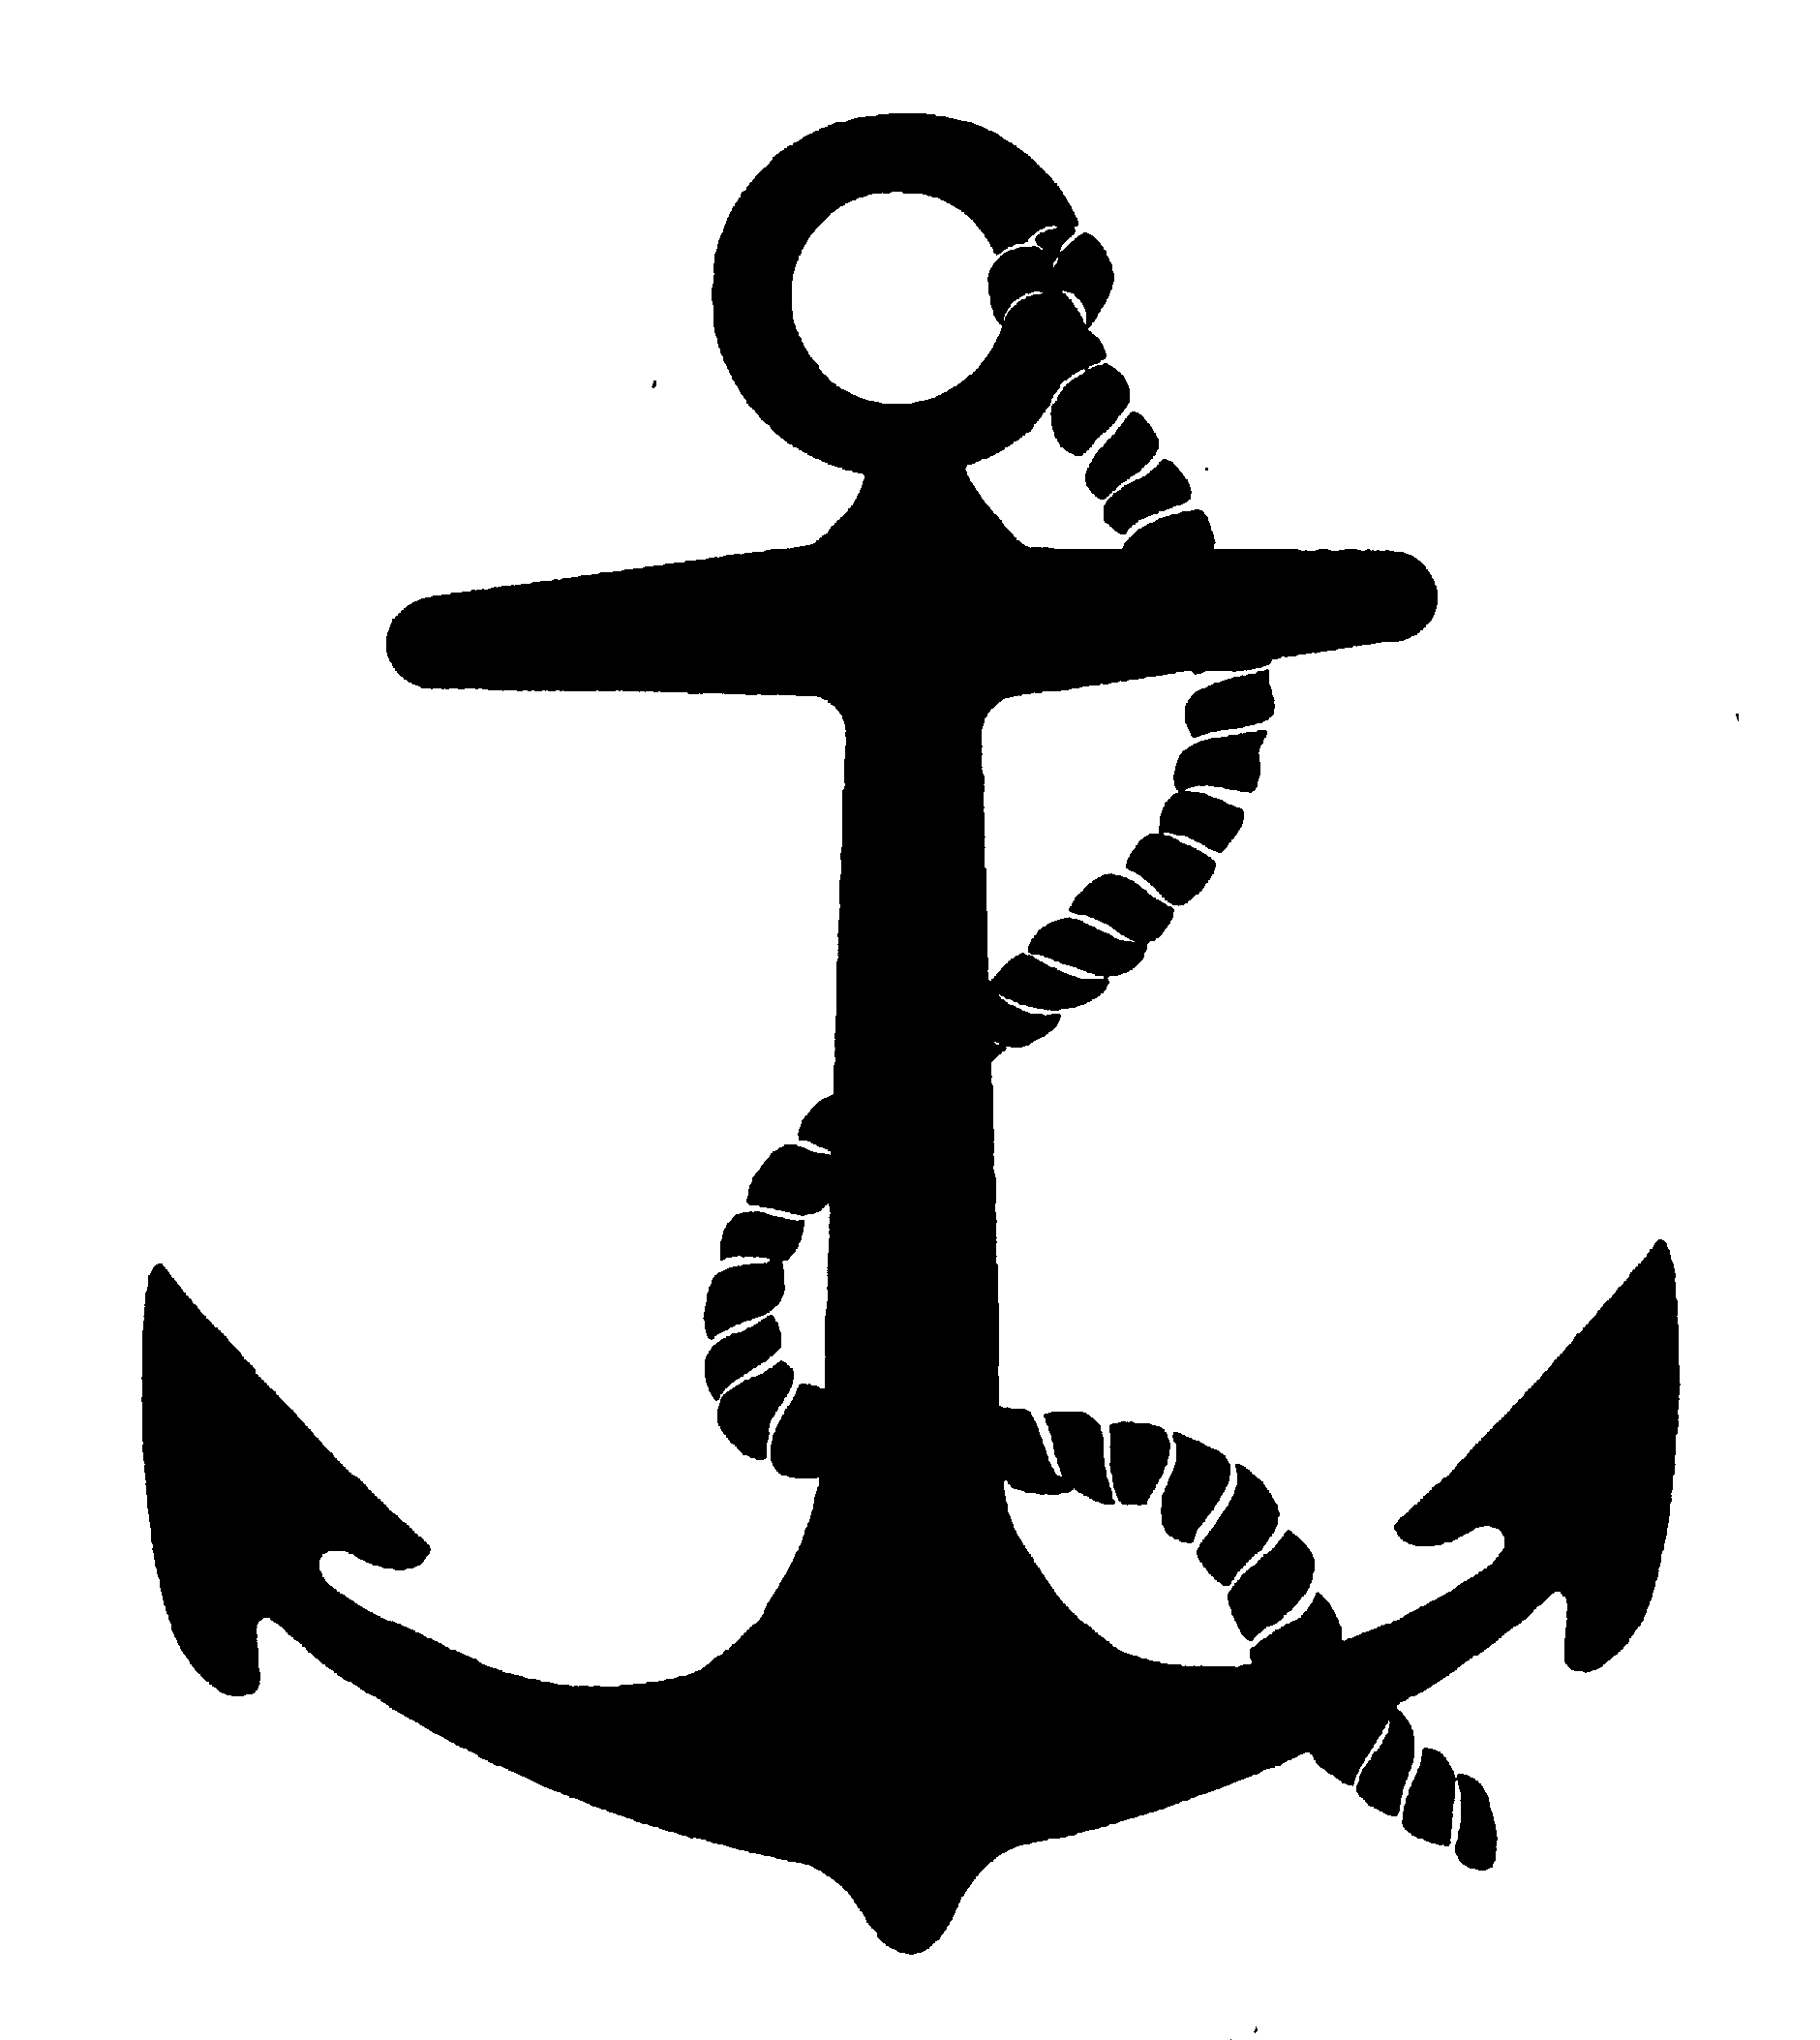 Image Of An Anchor - ClipArt Best